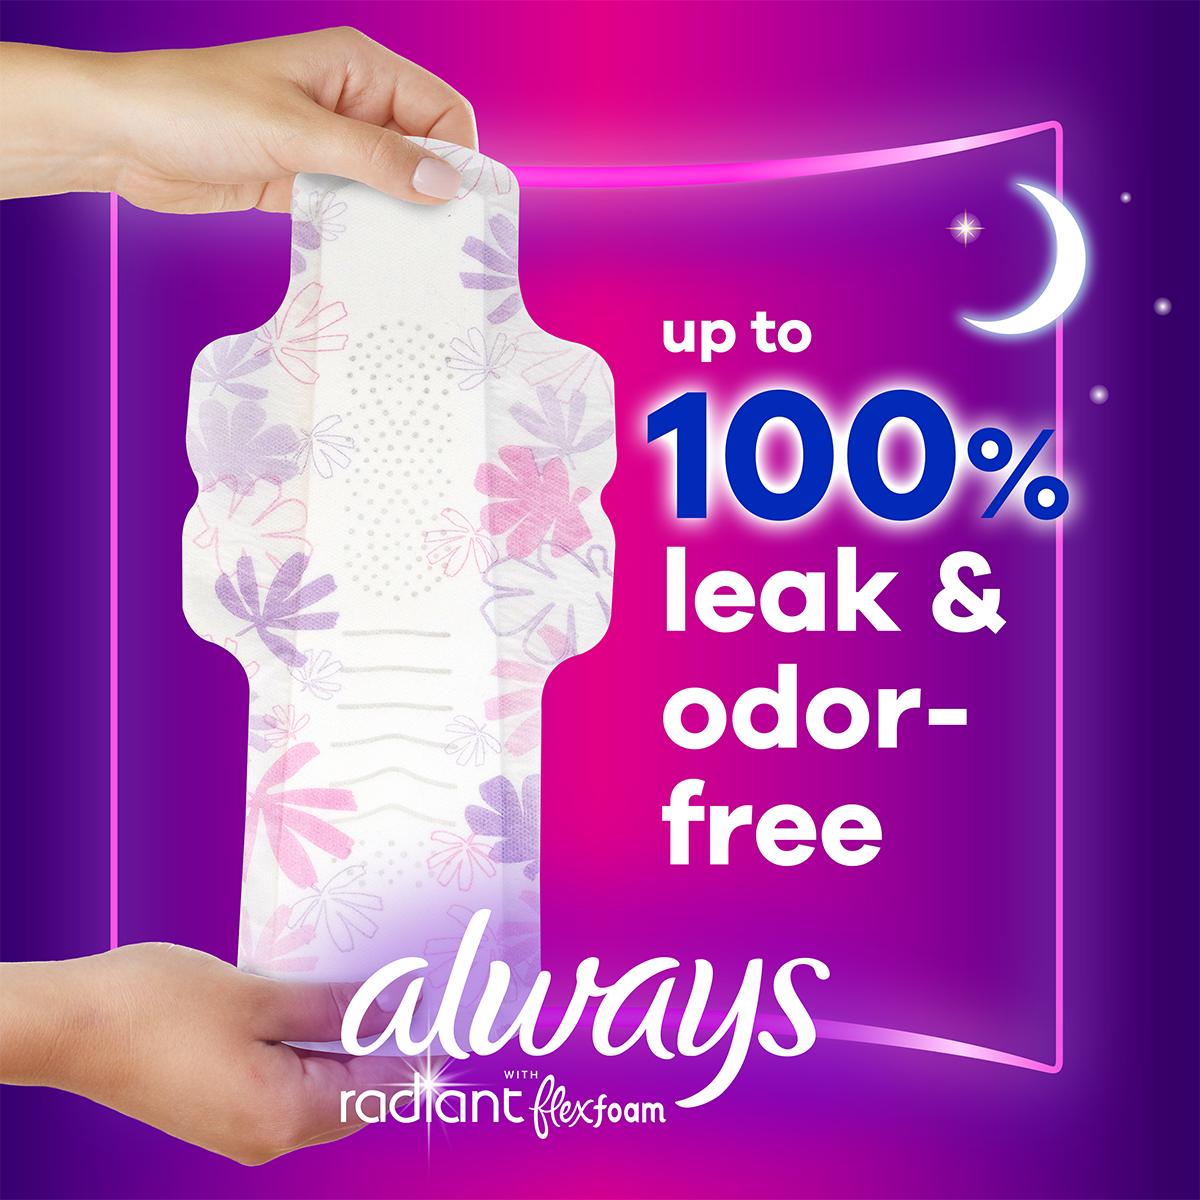 Always Maxi Overnight Pads with Wings, Size 5, Extra Heavy